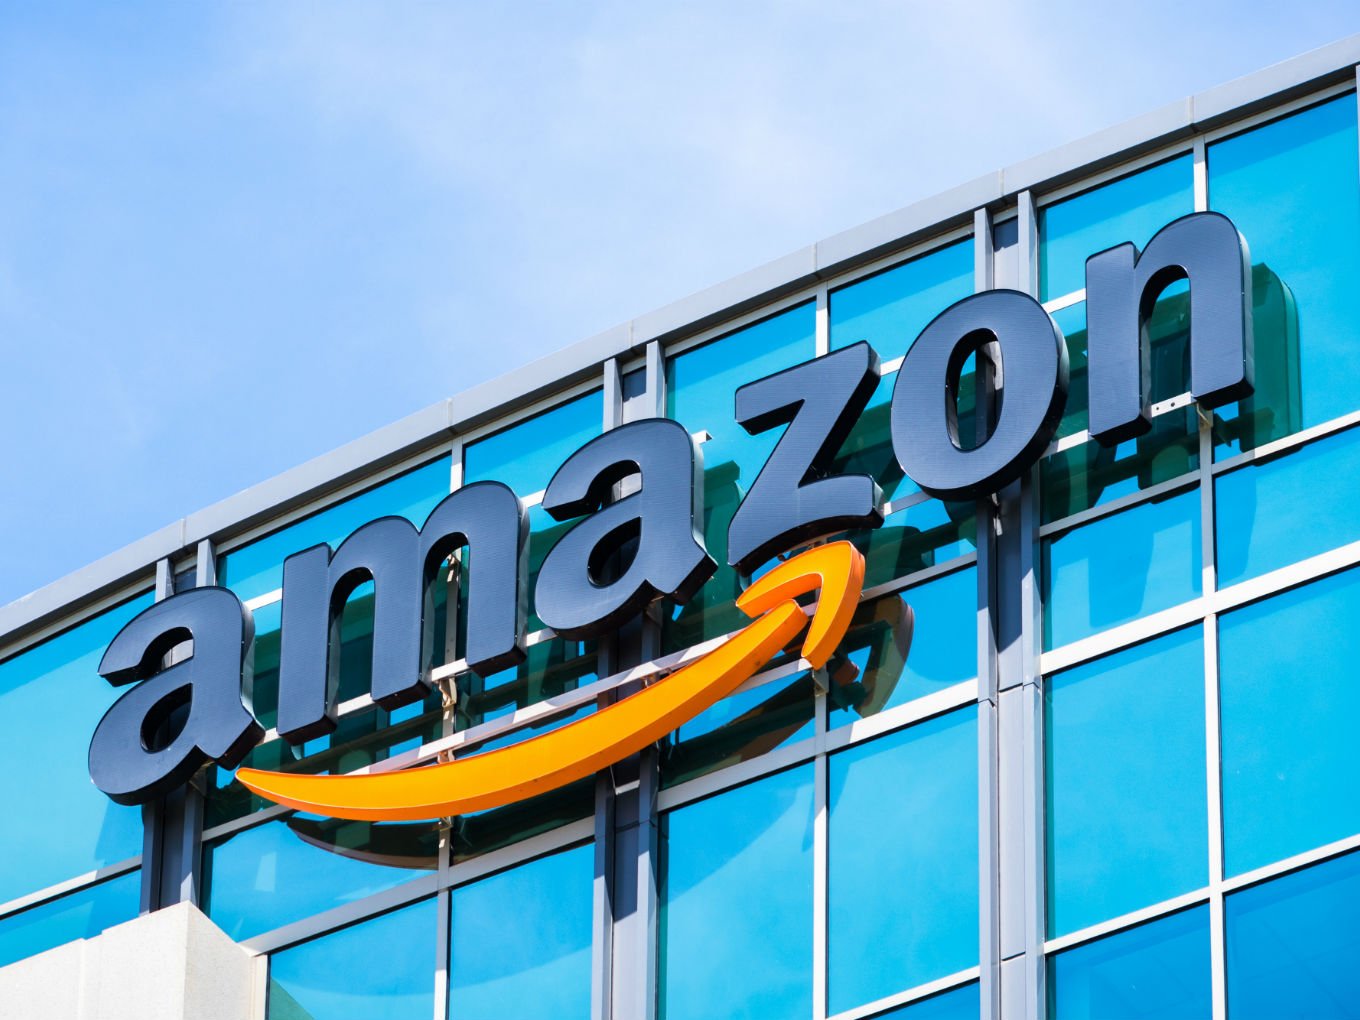 Back To The Shelf: Amazon May Finally Pick Up 10% Stake In Future Retail